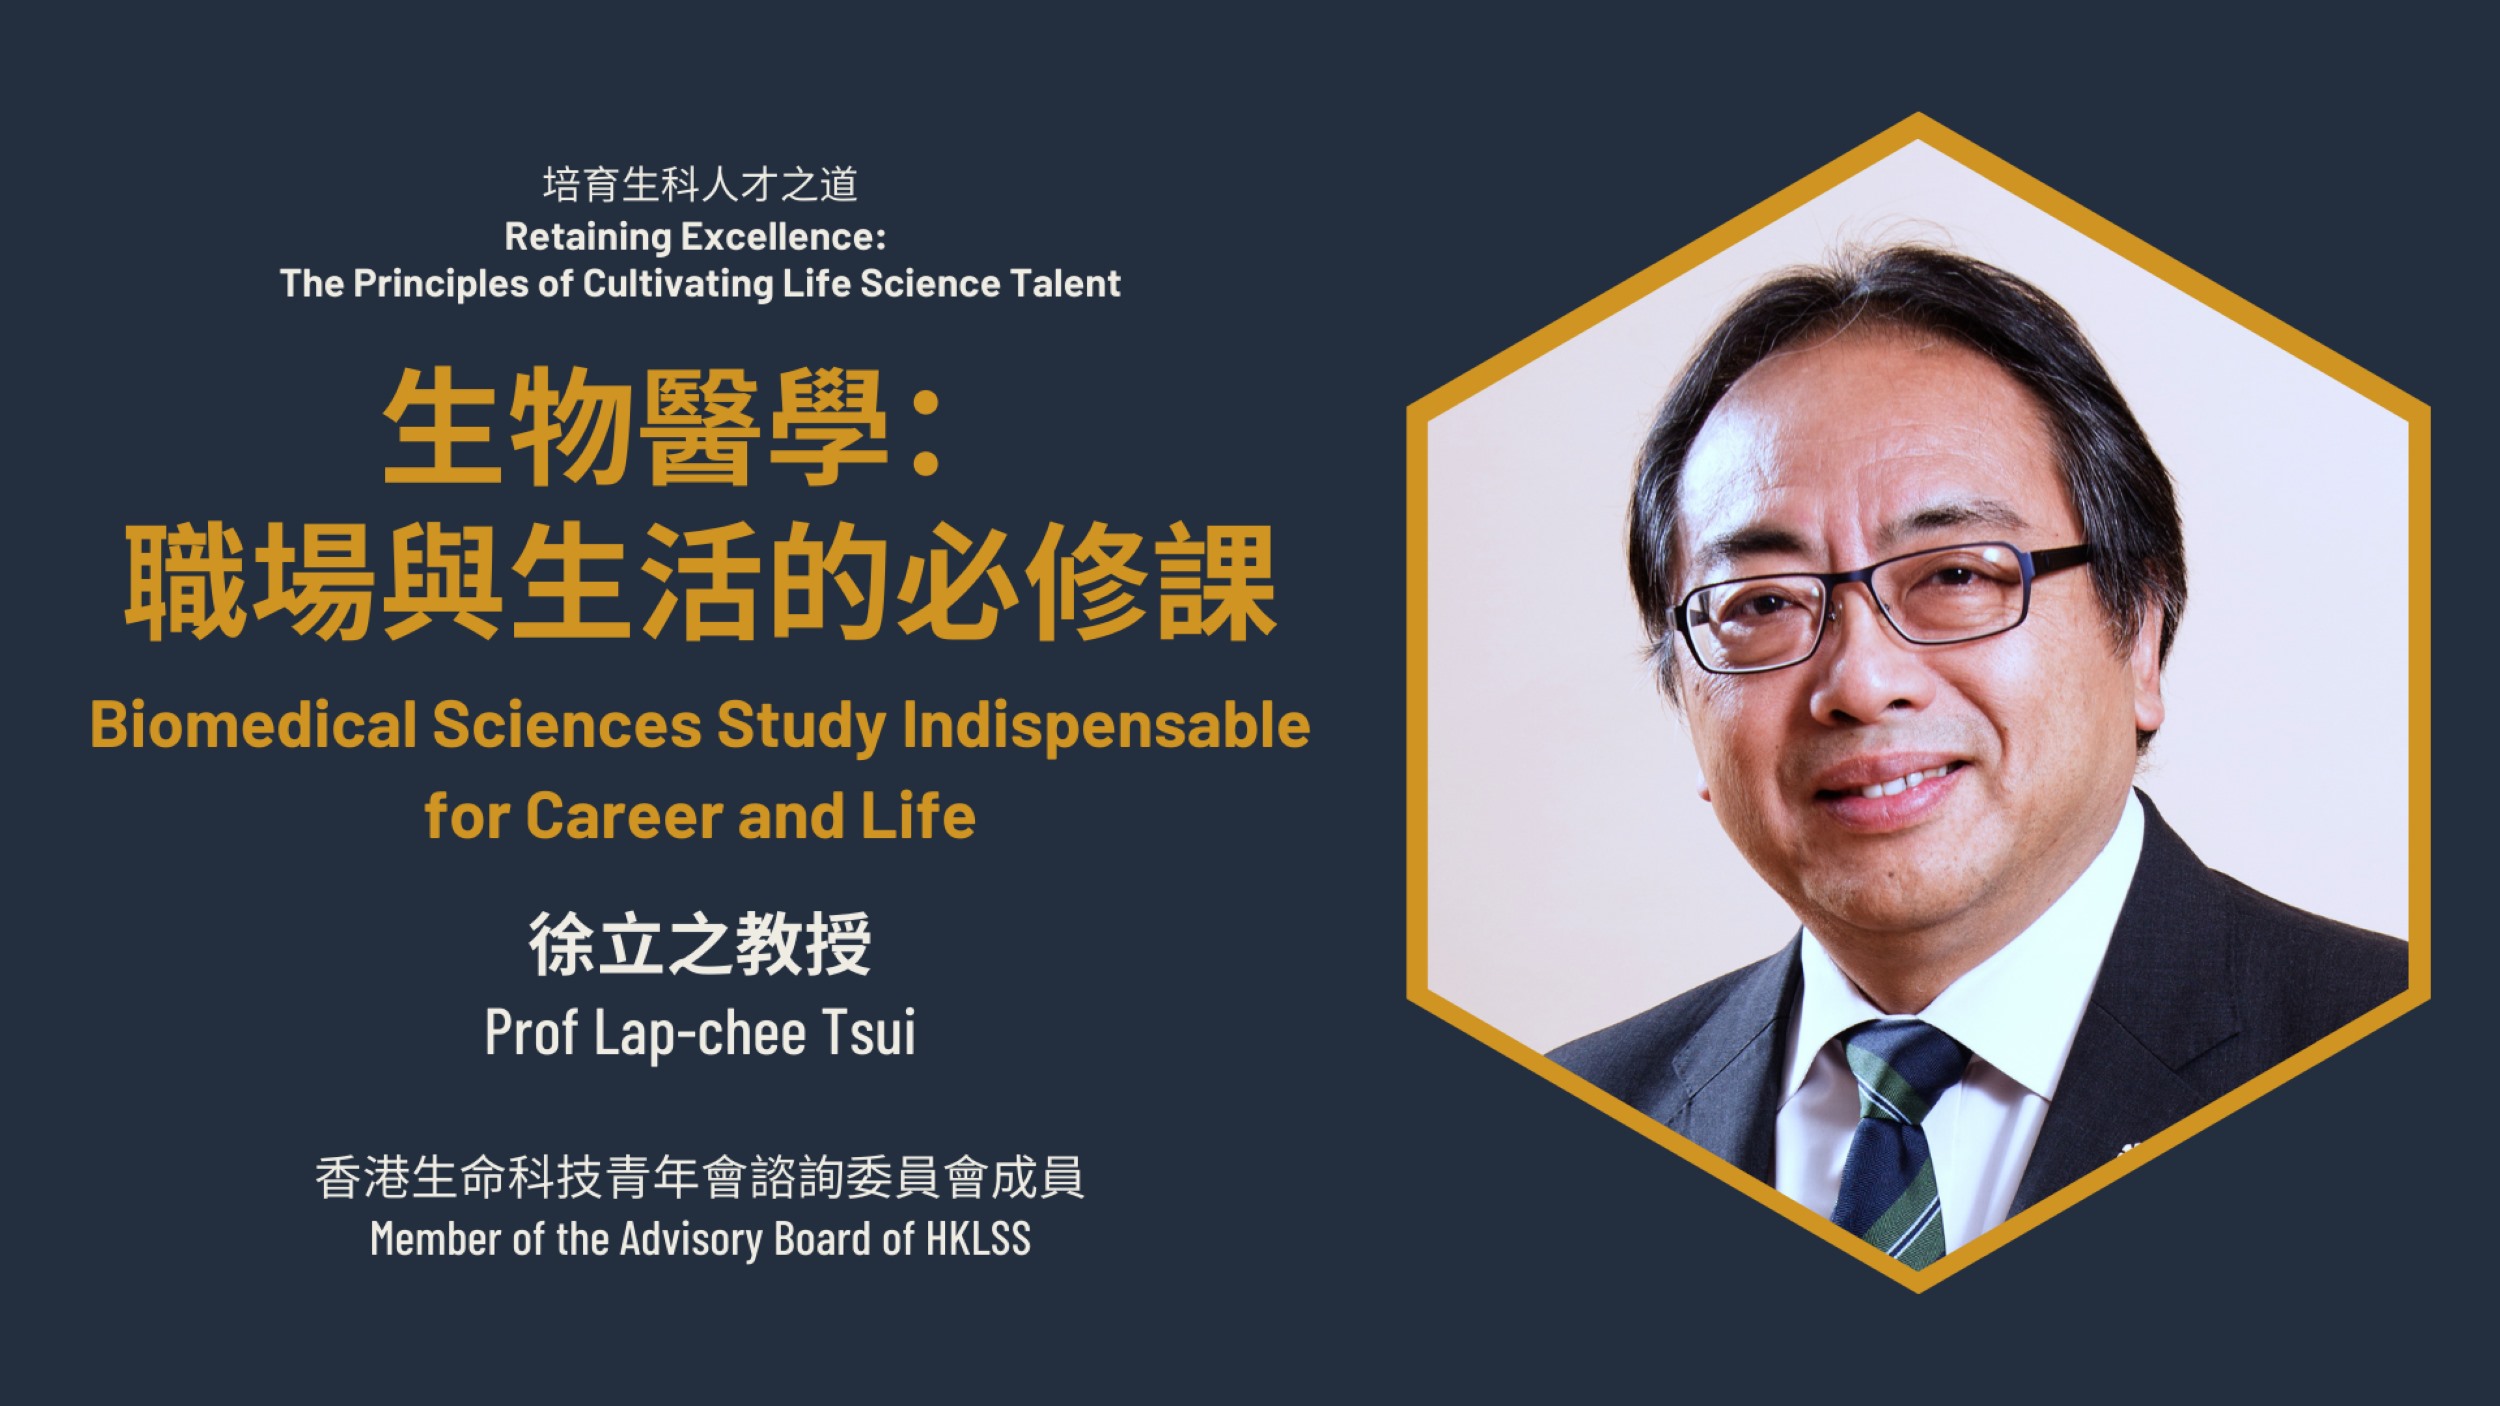 Professor Tsui Lap-chee emphasizes biomedical sciences study is indispensable for career and life